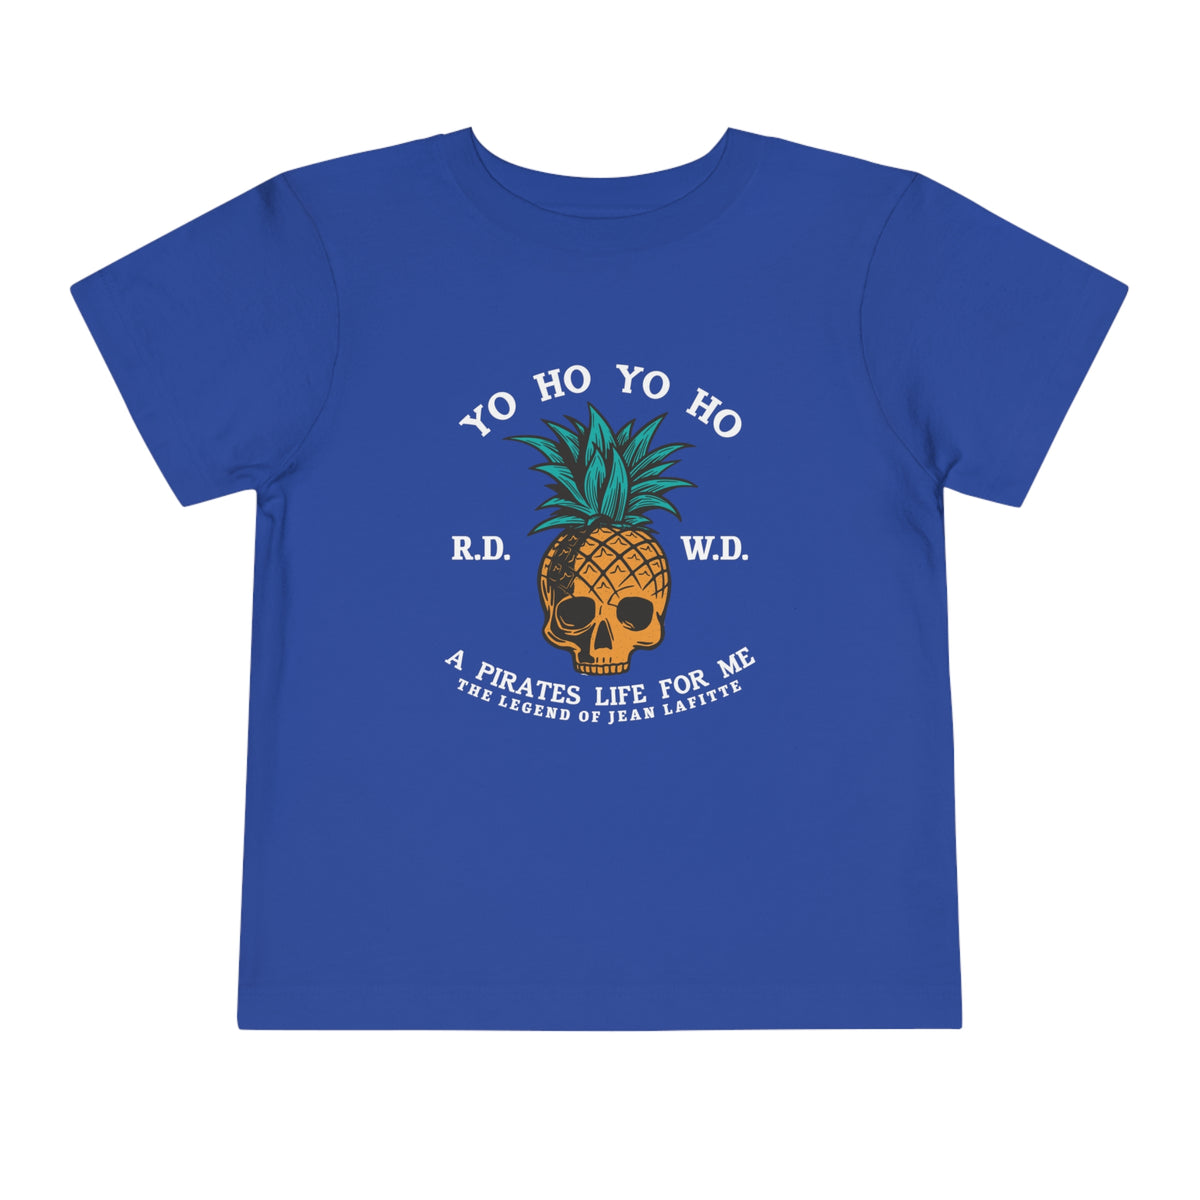 Yo Ho Pirates Life For Me Bella Canvas Toddler Short Sleeve Tee